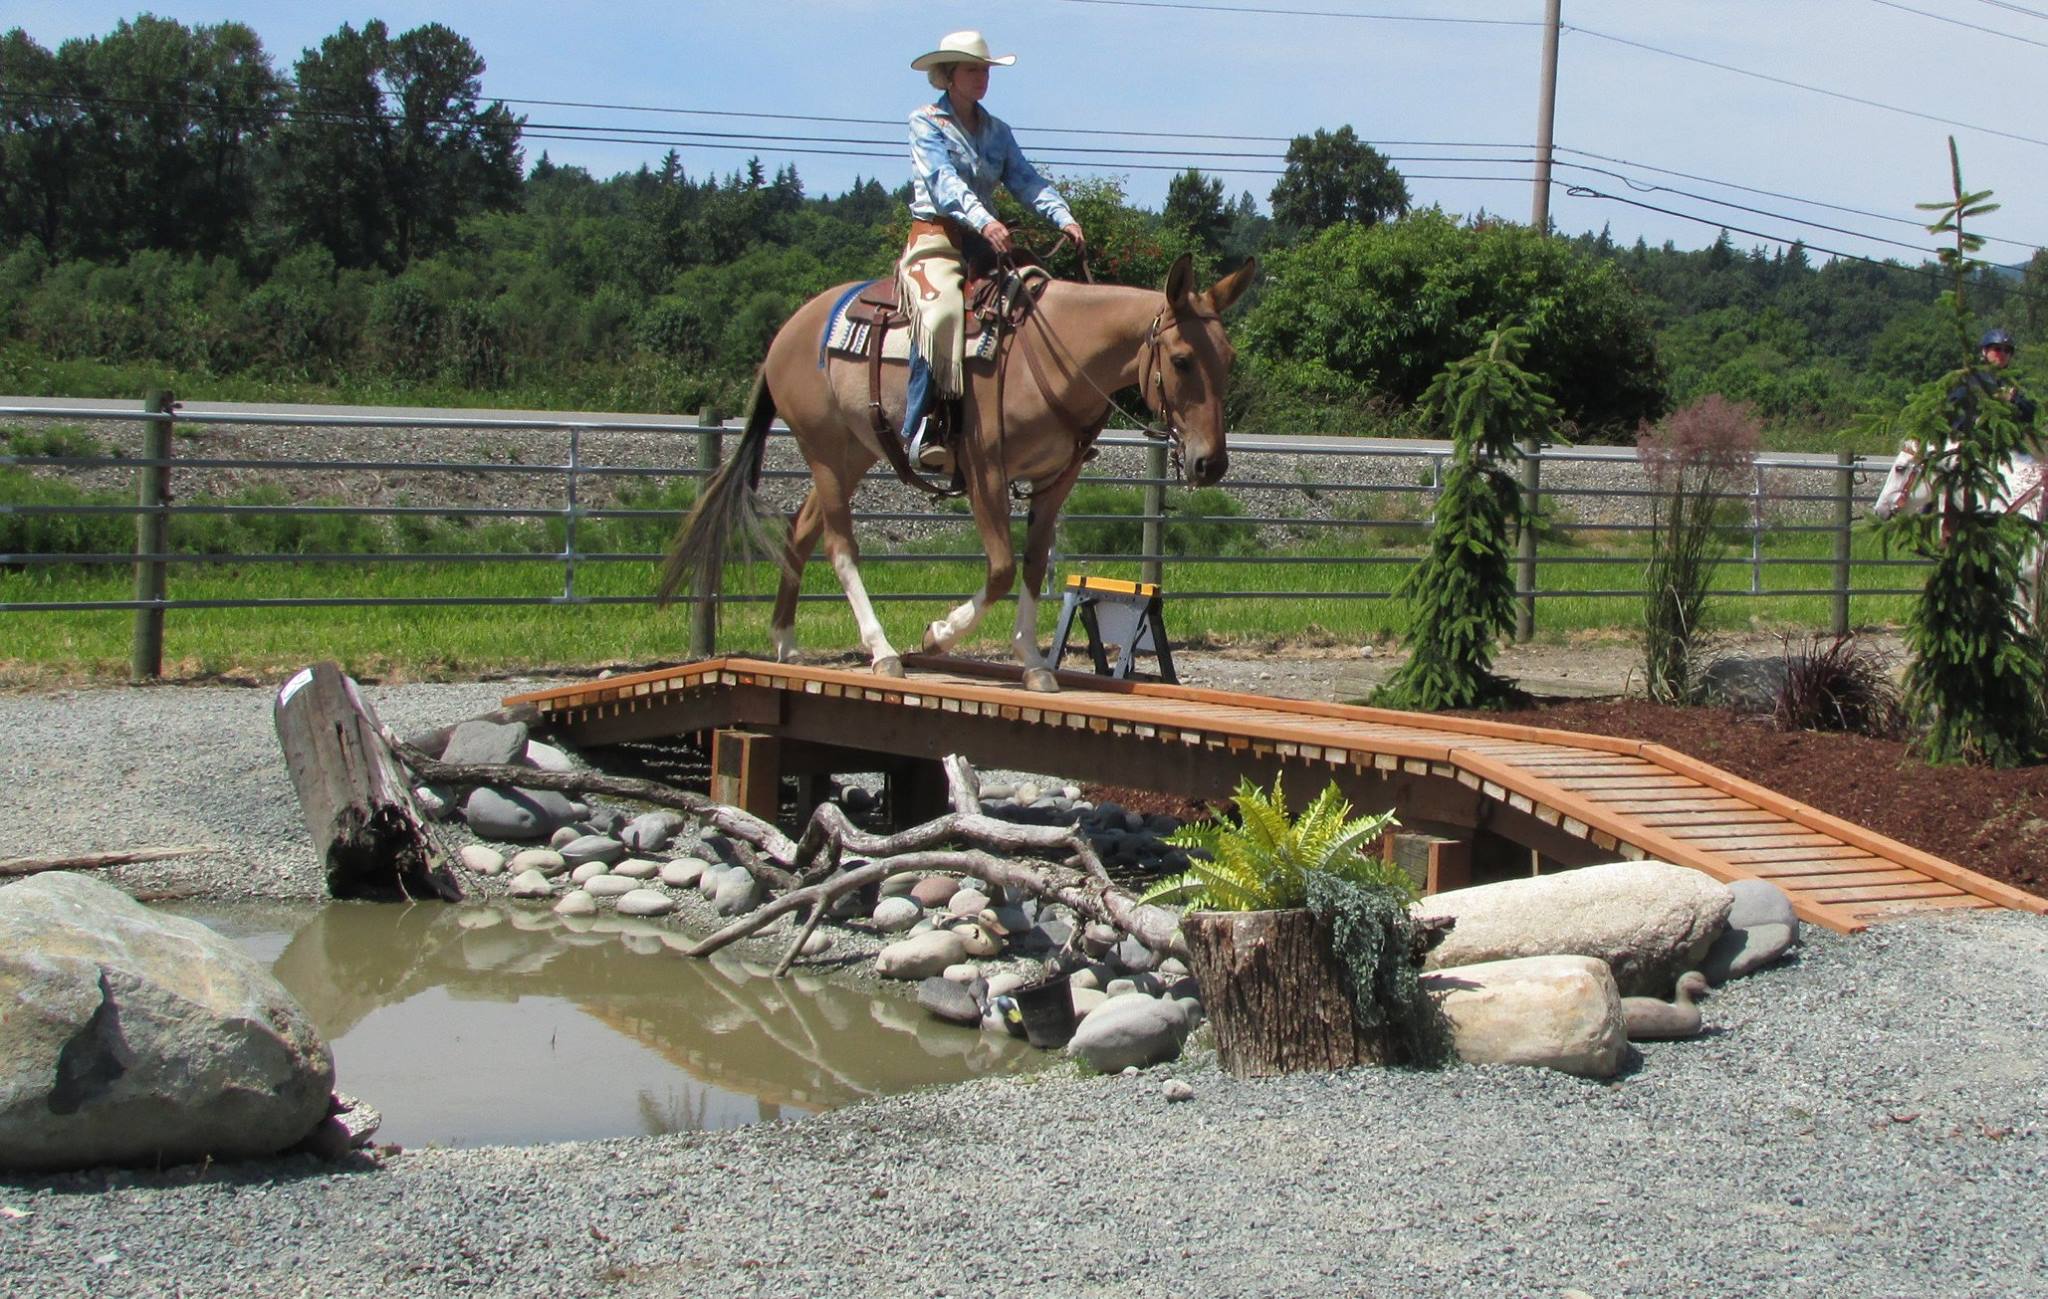 Obstacle Training for Show or a better relationship with your horse clinics, horsemanship, manners, confidence. Cindi has been training people and horses through the use of obstacles for over 25 years. The use of obstacles is also the best way to help people understand the way a horse learns and thinks.